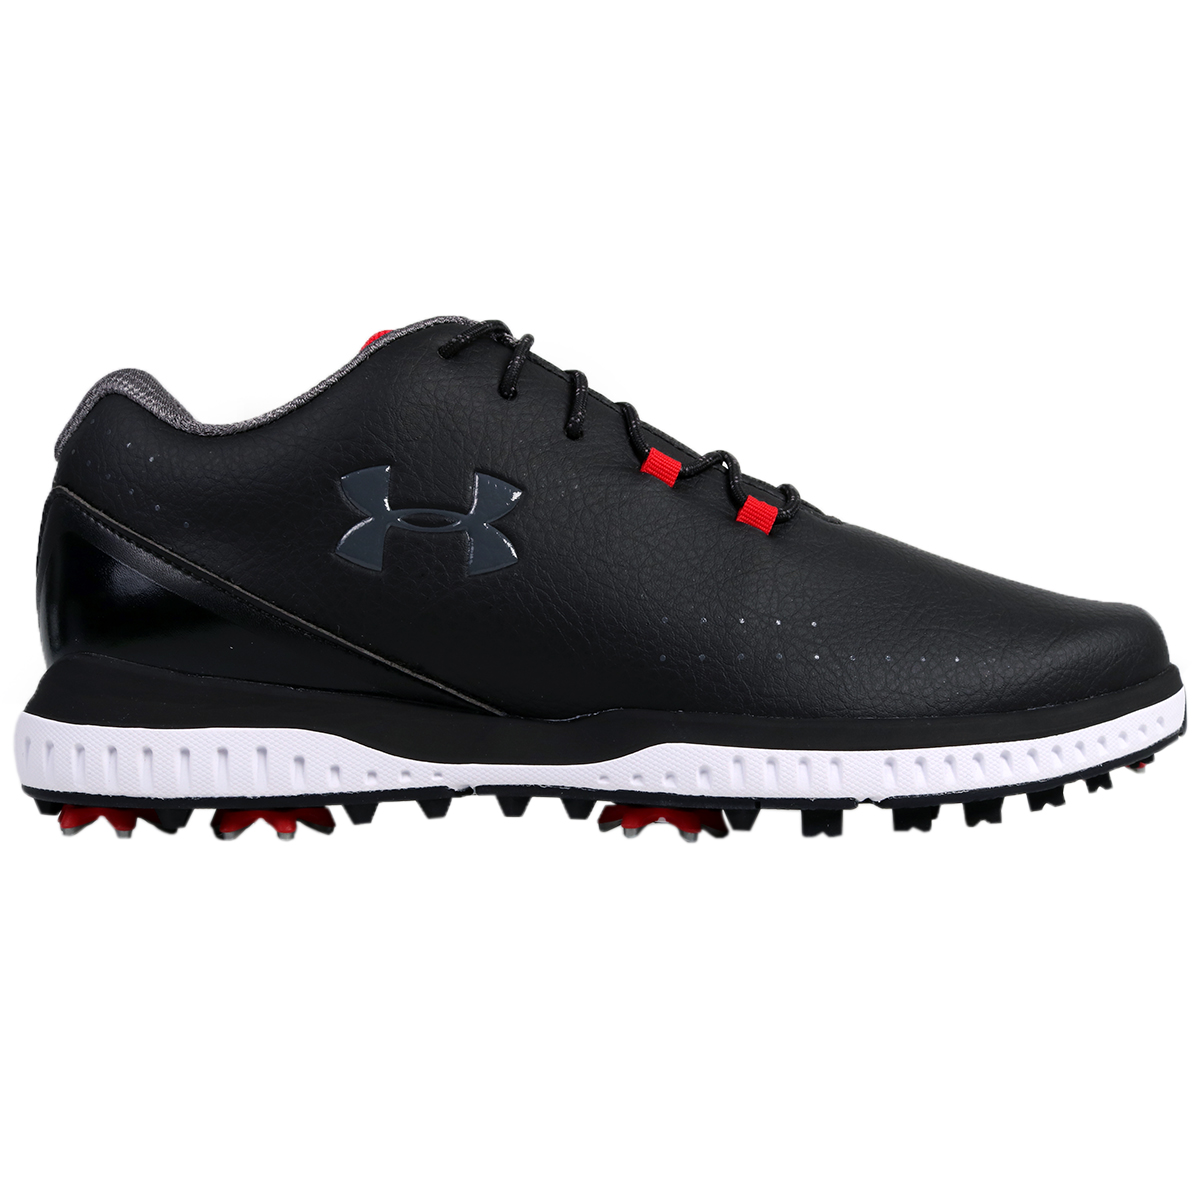 under armour rst golf shoes